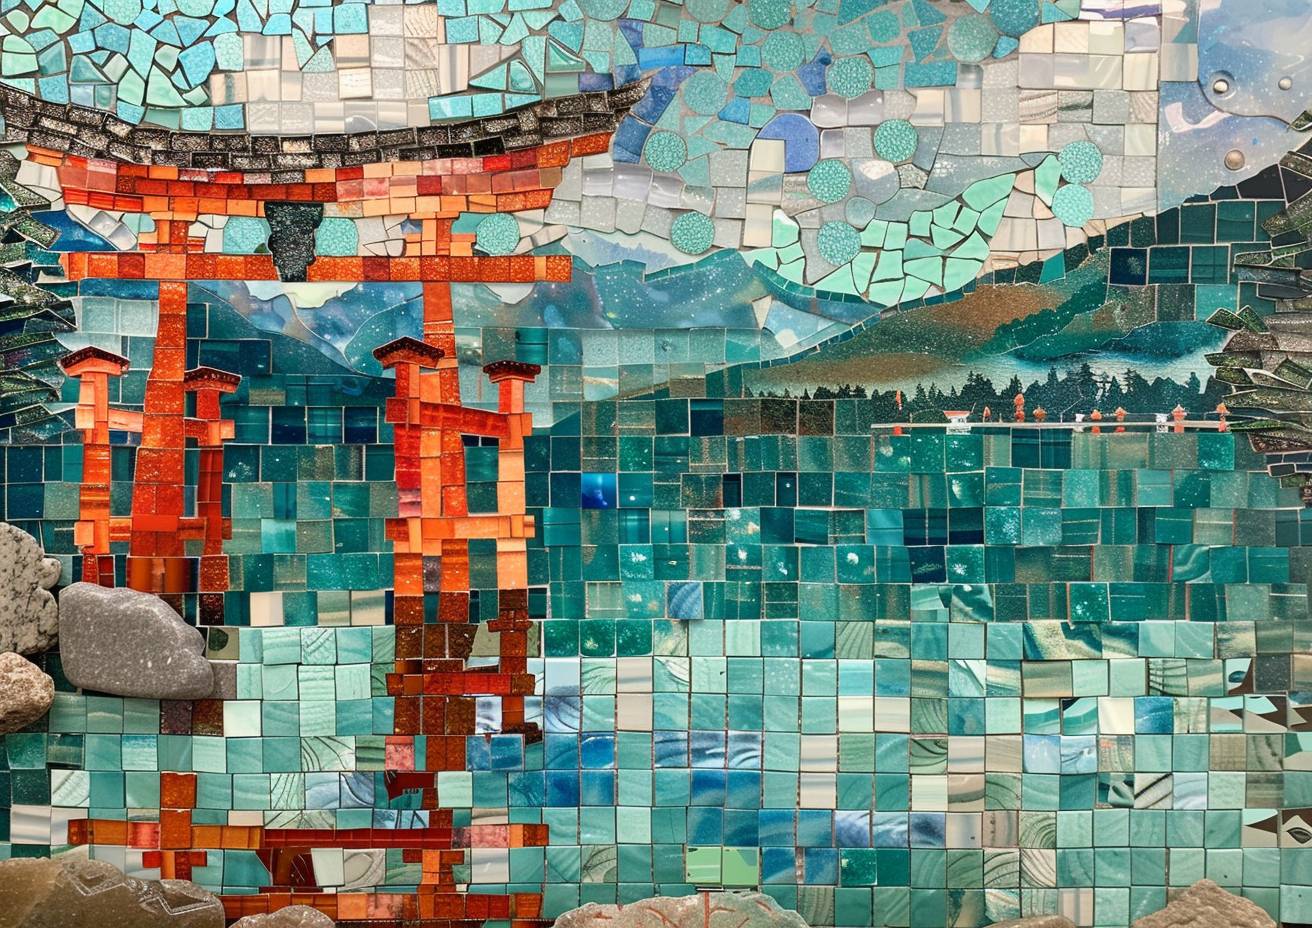 Sea glass mosaic, intricate detail, depicting a lakeside shrine, floating Torii gate, rippling reflections, mountains in background, strong visual flow.